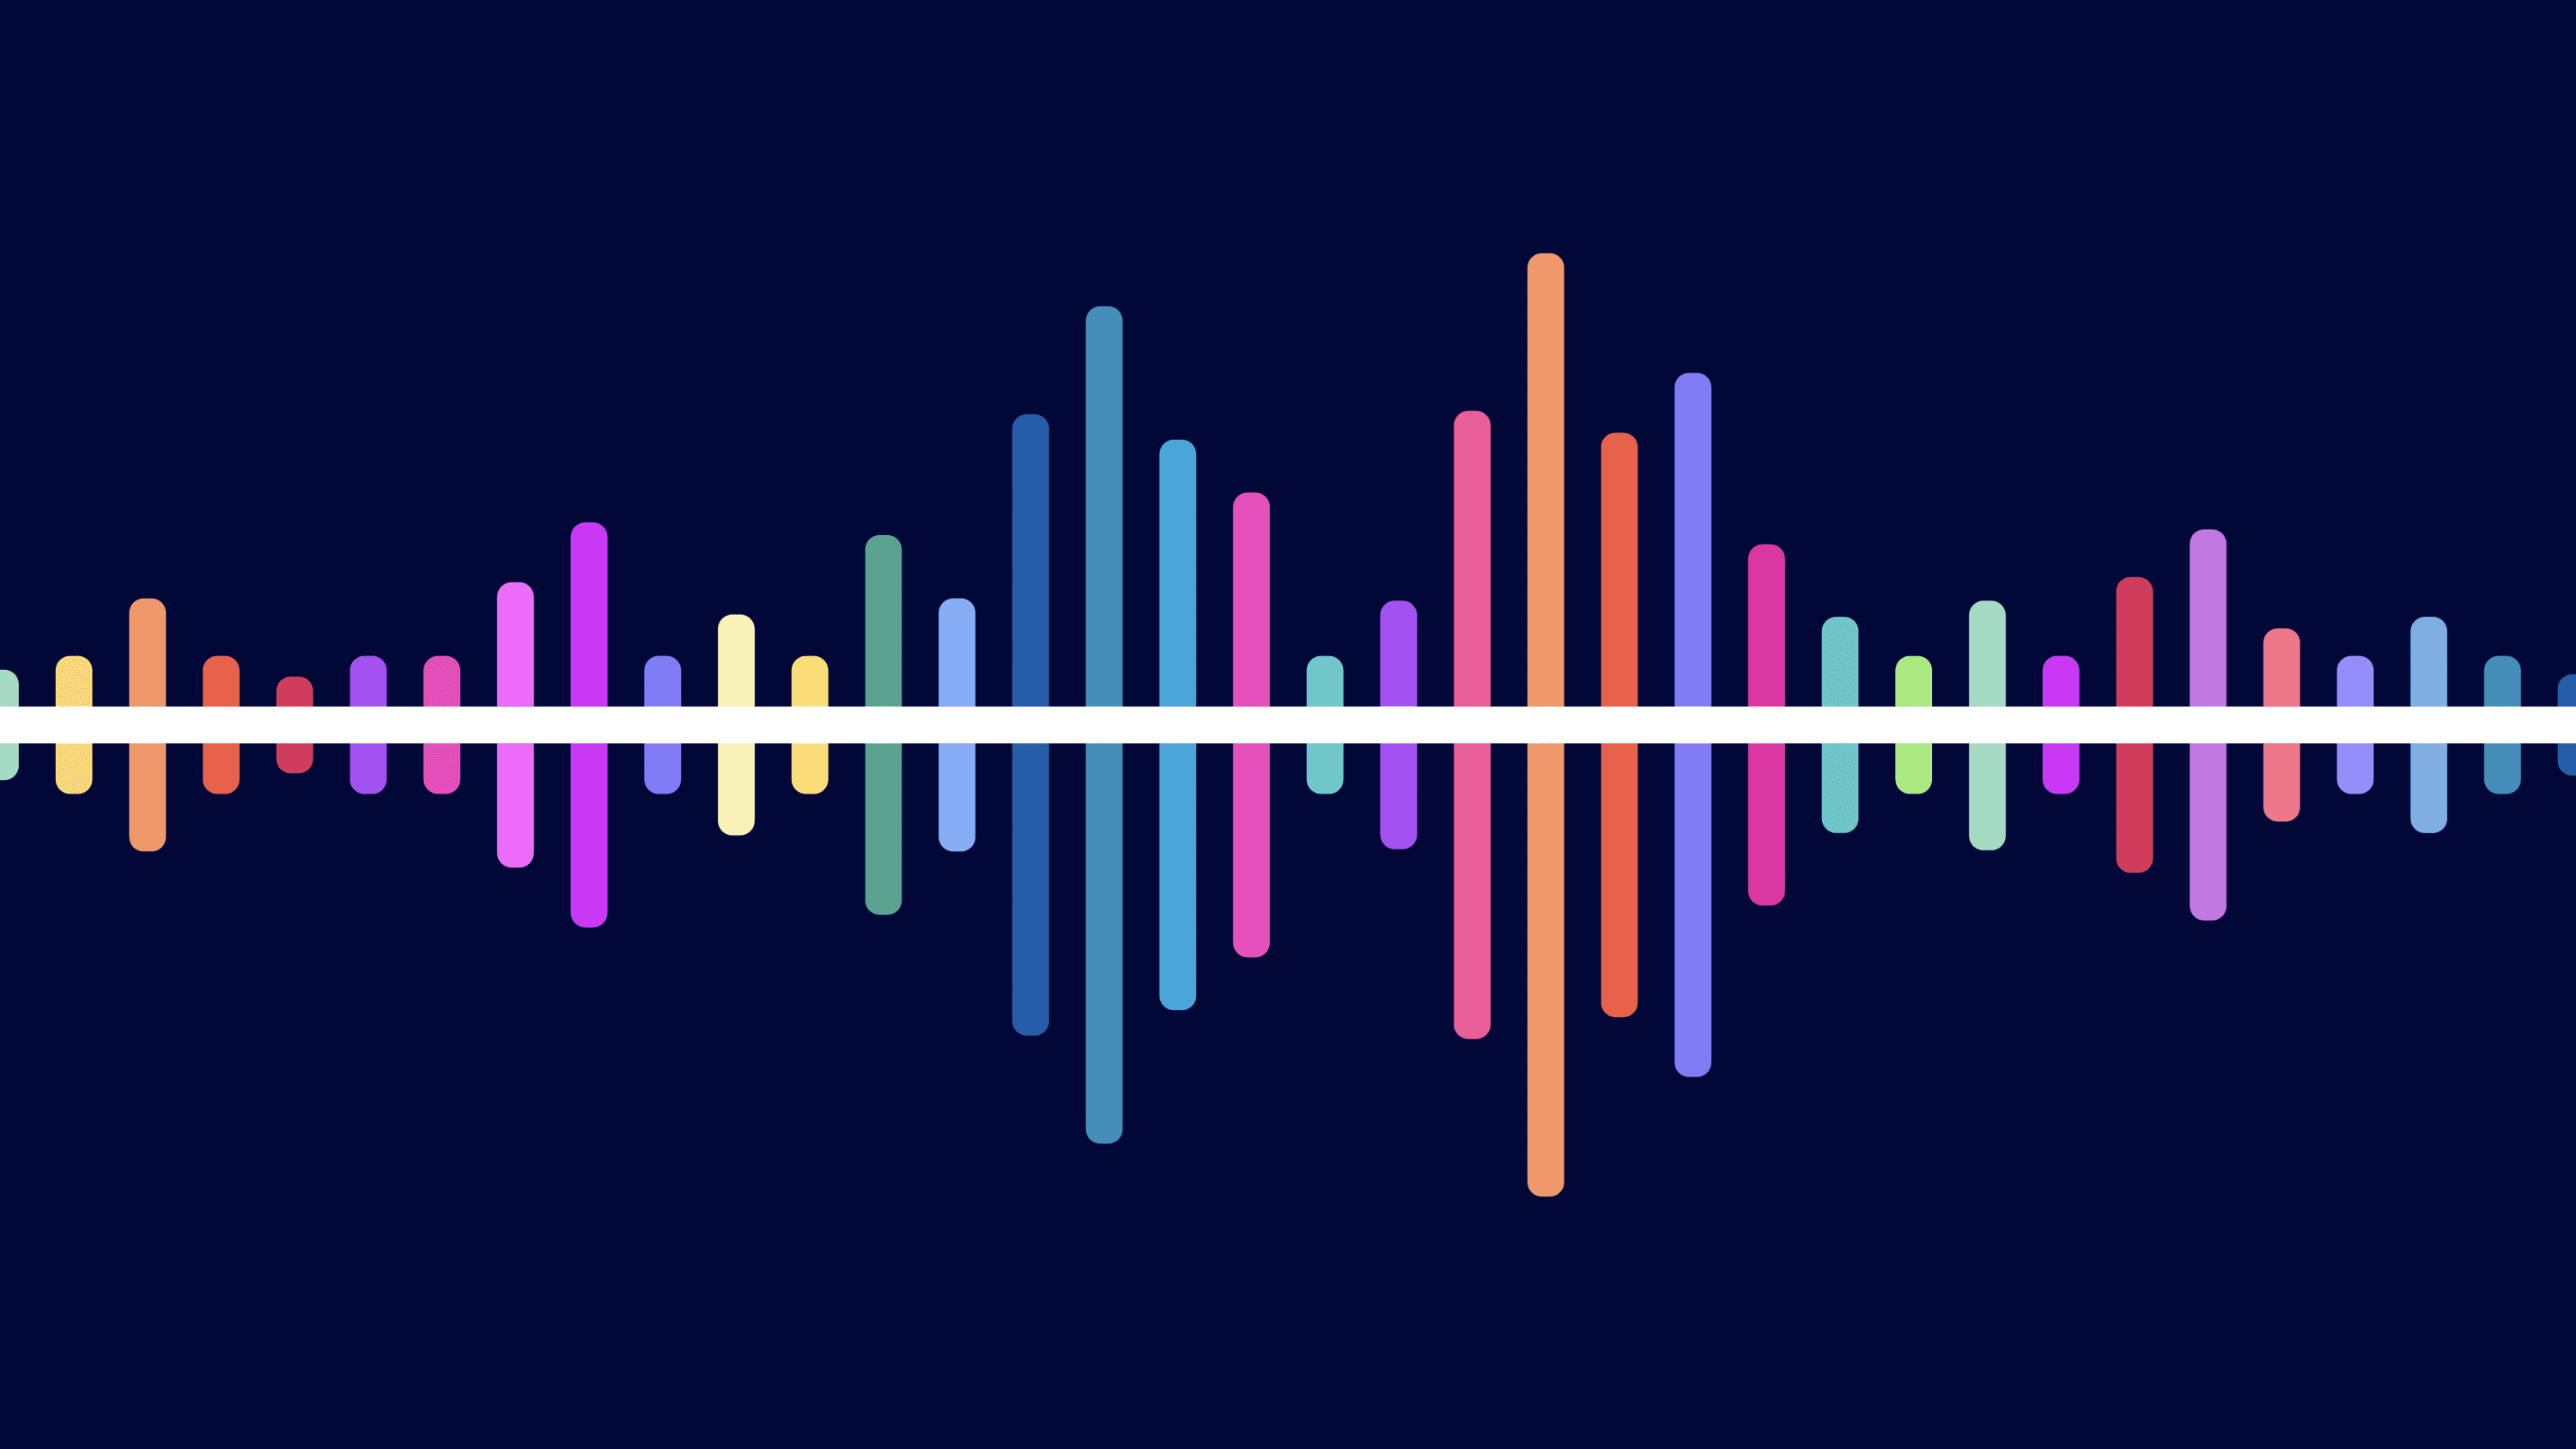 Colorful sound wave illustration, representing remote cochlear implant programming